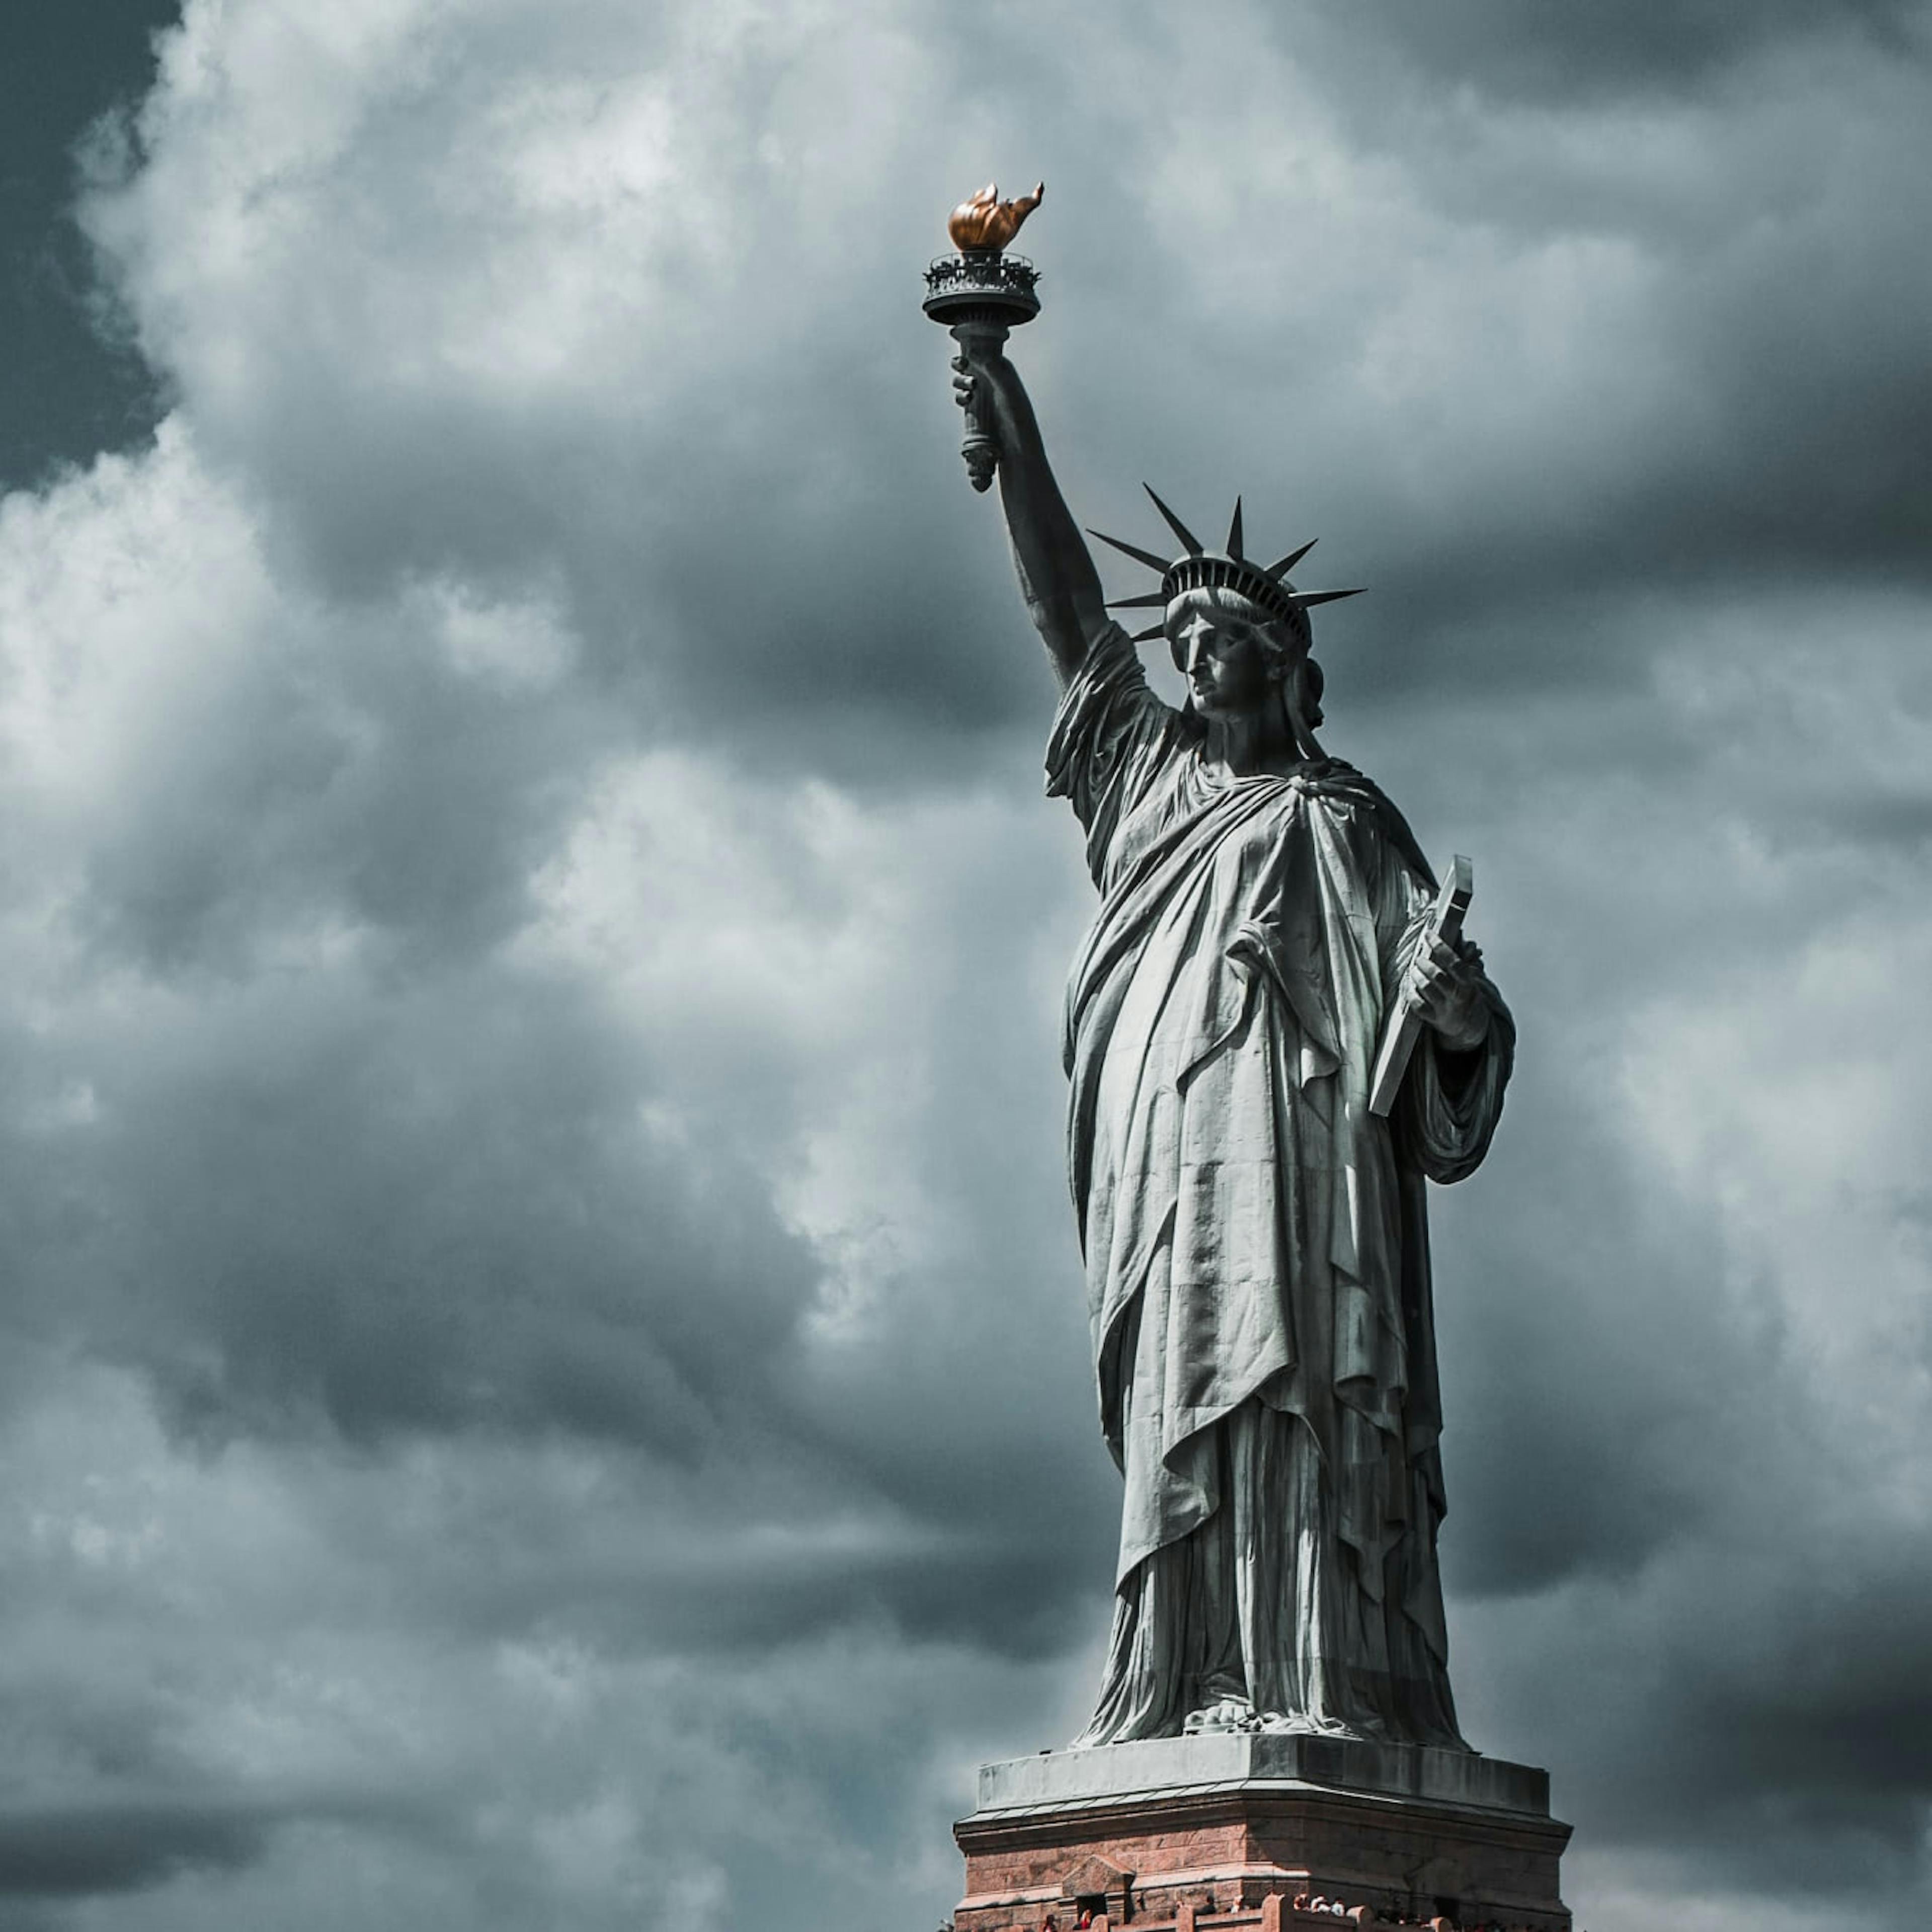 The Statue of Liberty has long been a beacon of hope for people immigrating to the United States.